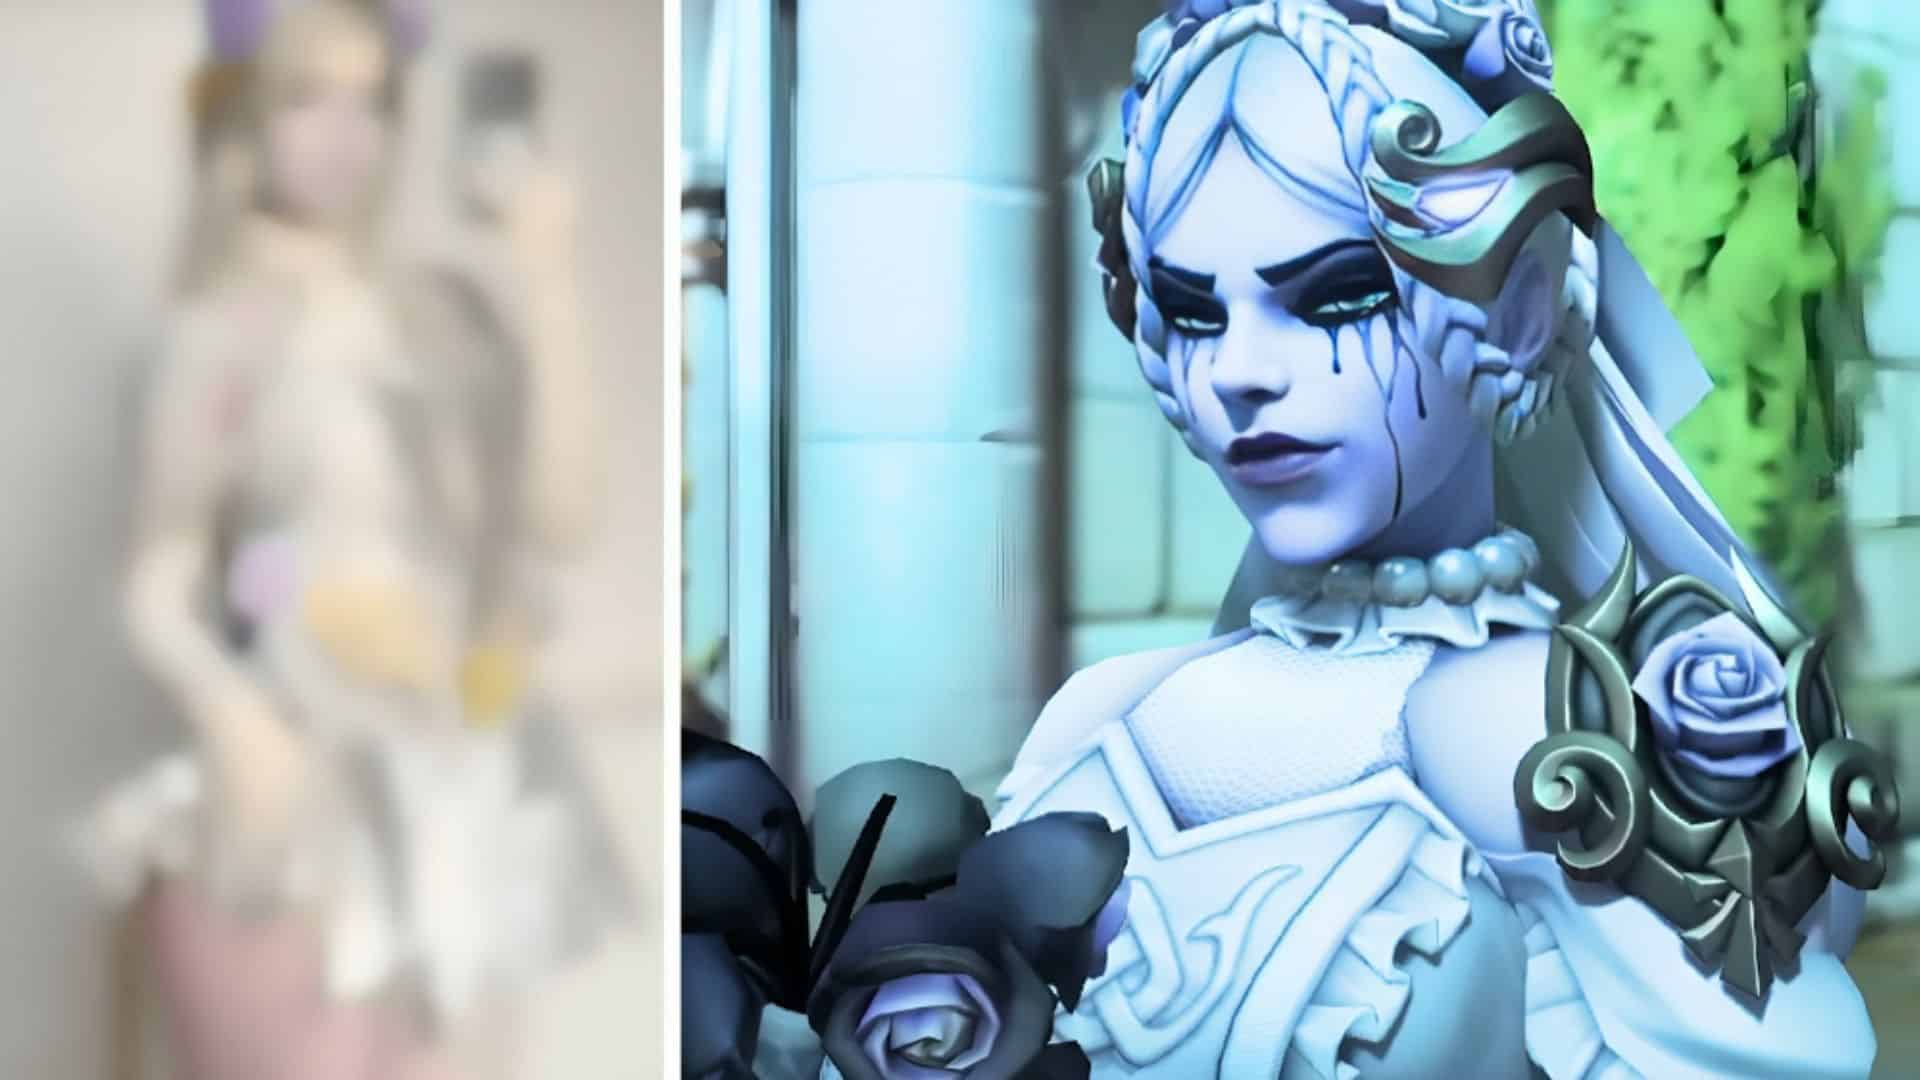 Overwatch 2 Widowmaker cosplay is ‘so pretty’ as rare Ghostly Bride skin